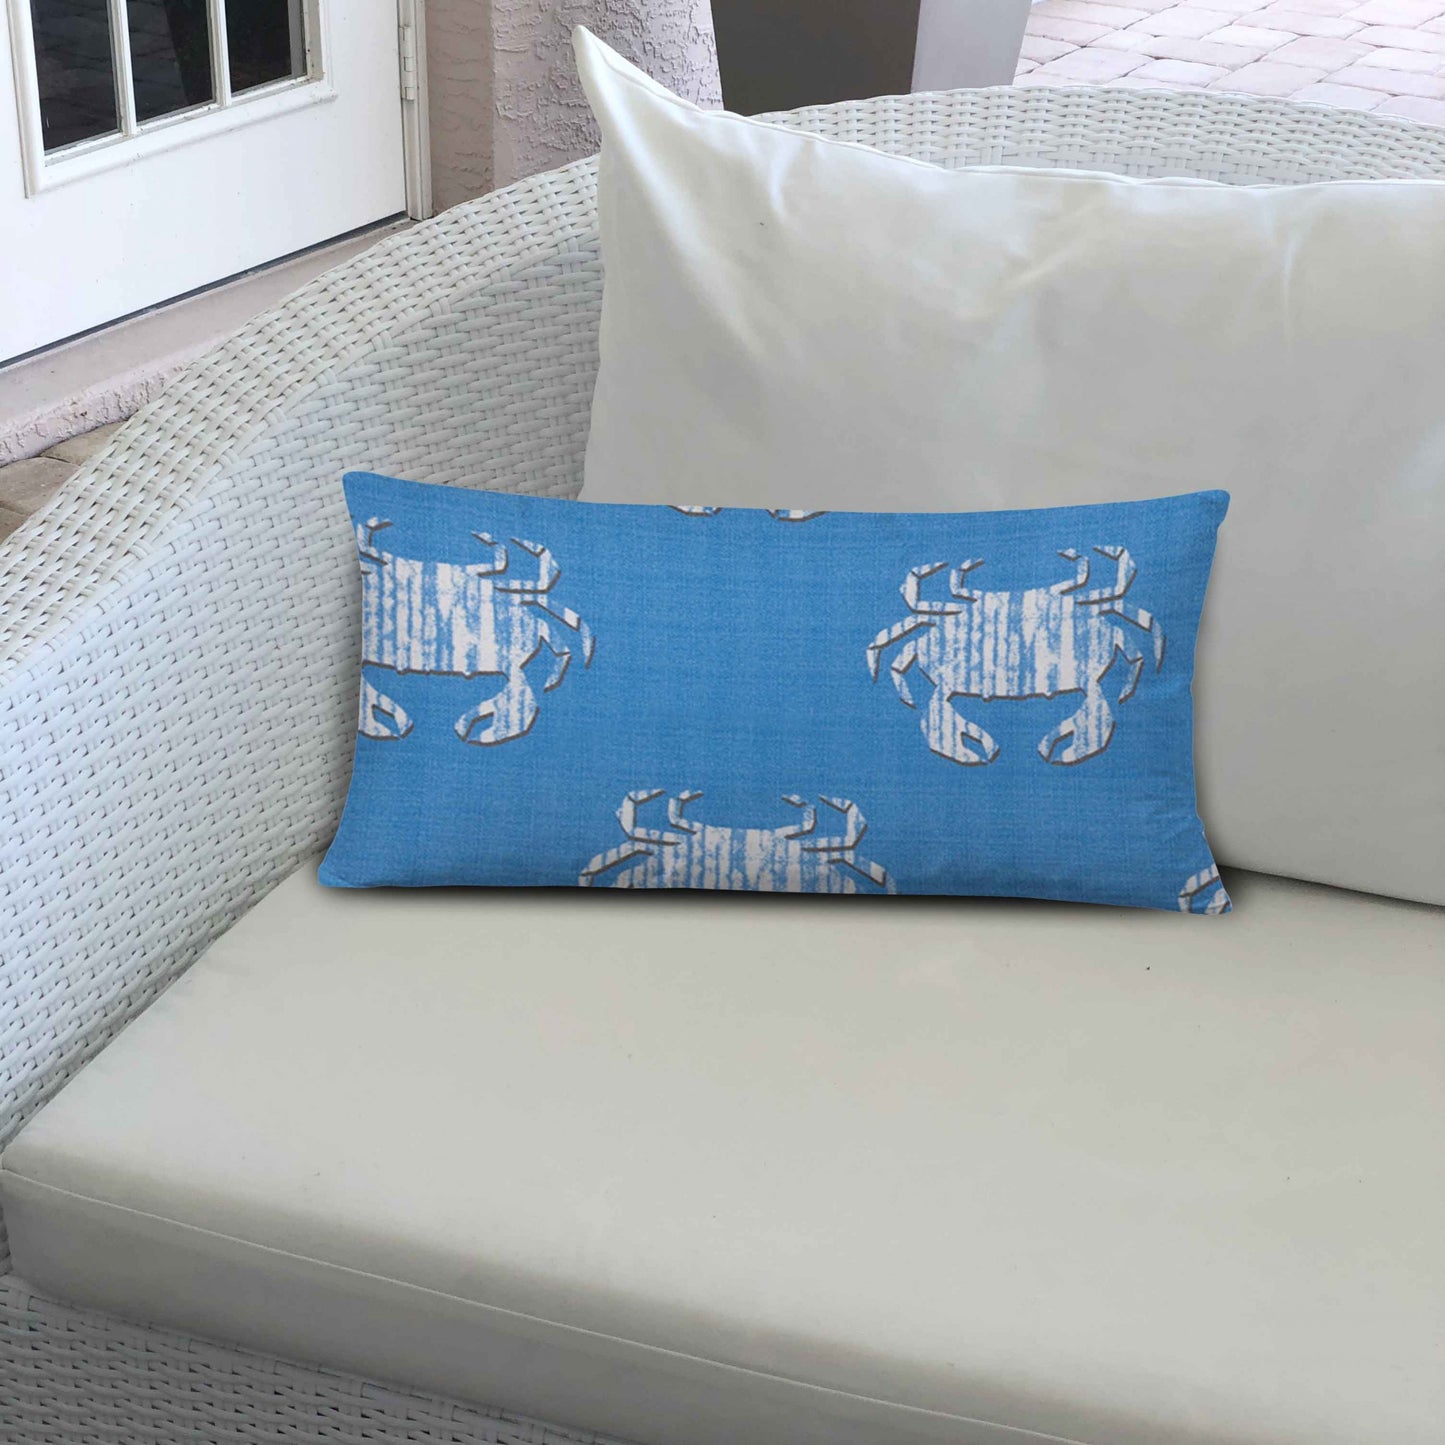 14" X 20" Blue And White Crab Zippered Coastal Lumbar Indoor Outdoor Pillow Cover